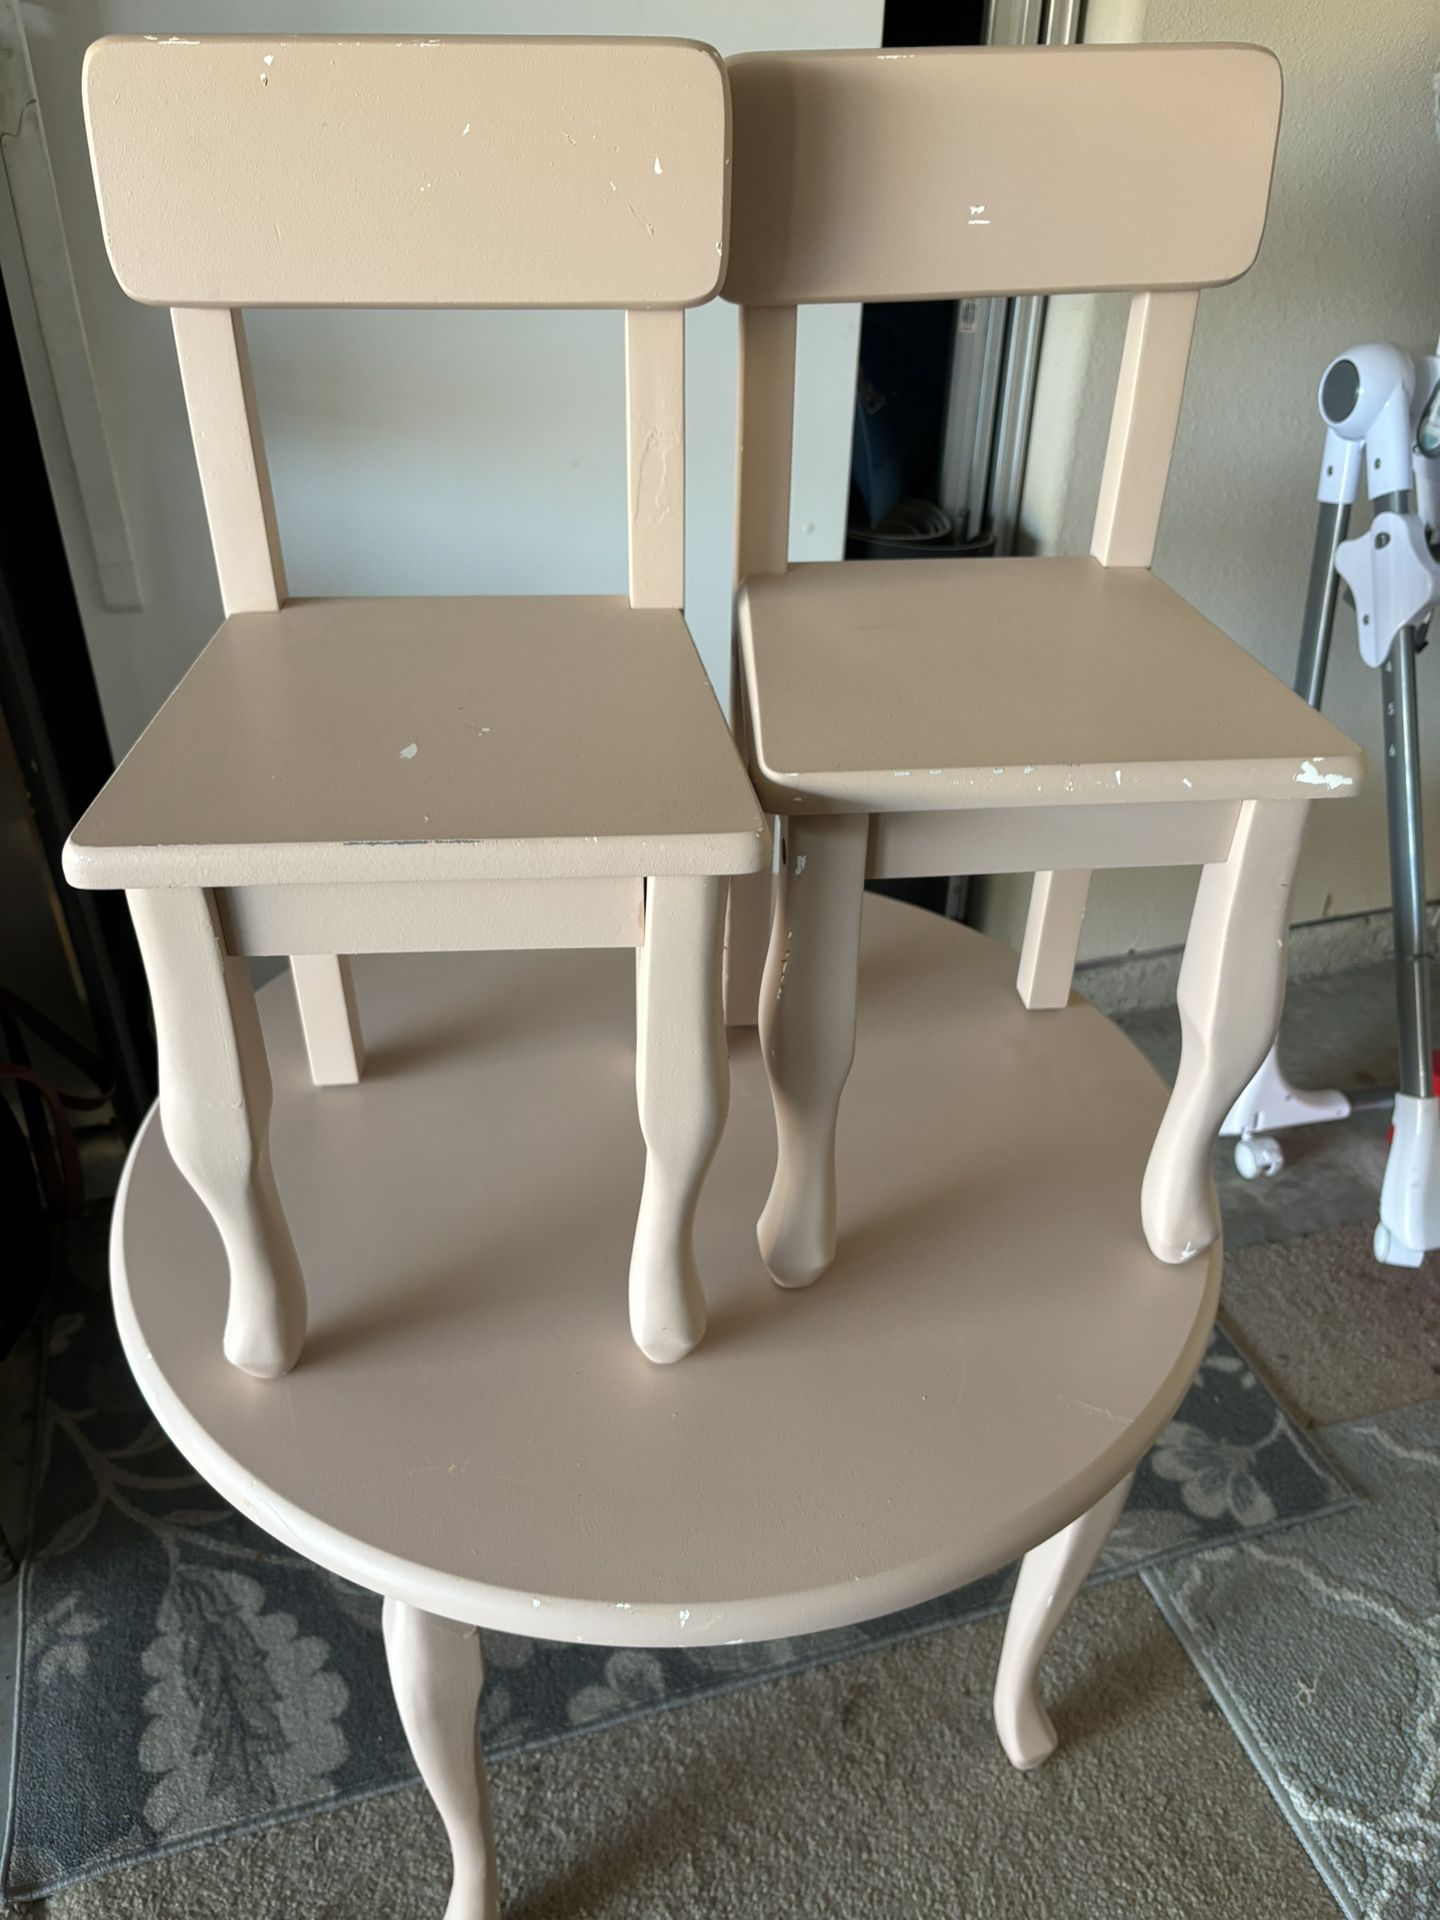 Kids Table And 2 Chairs